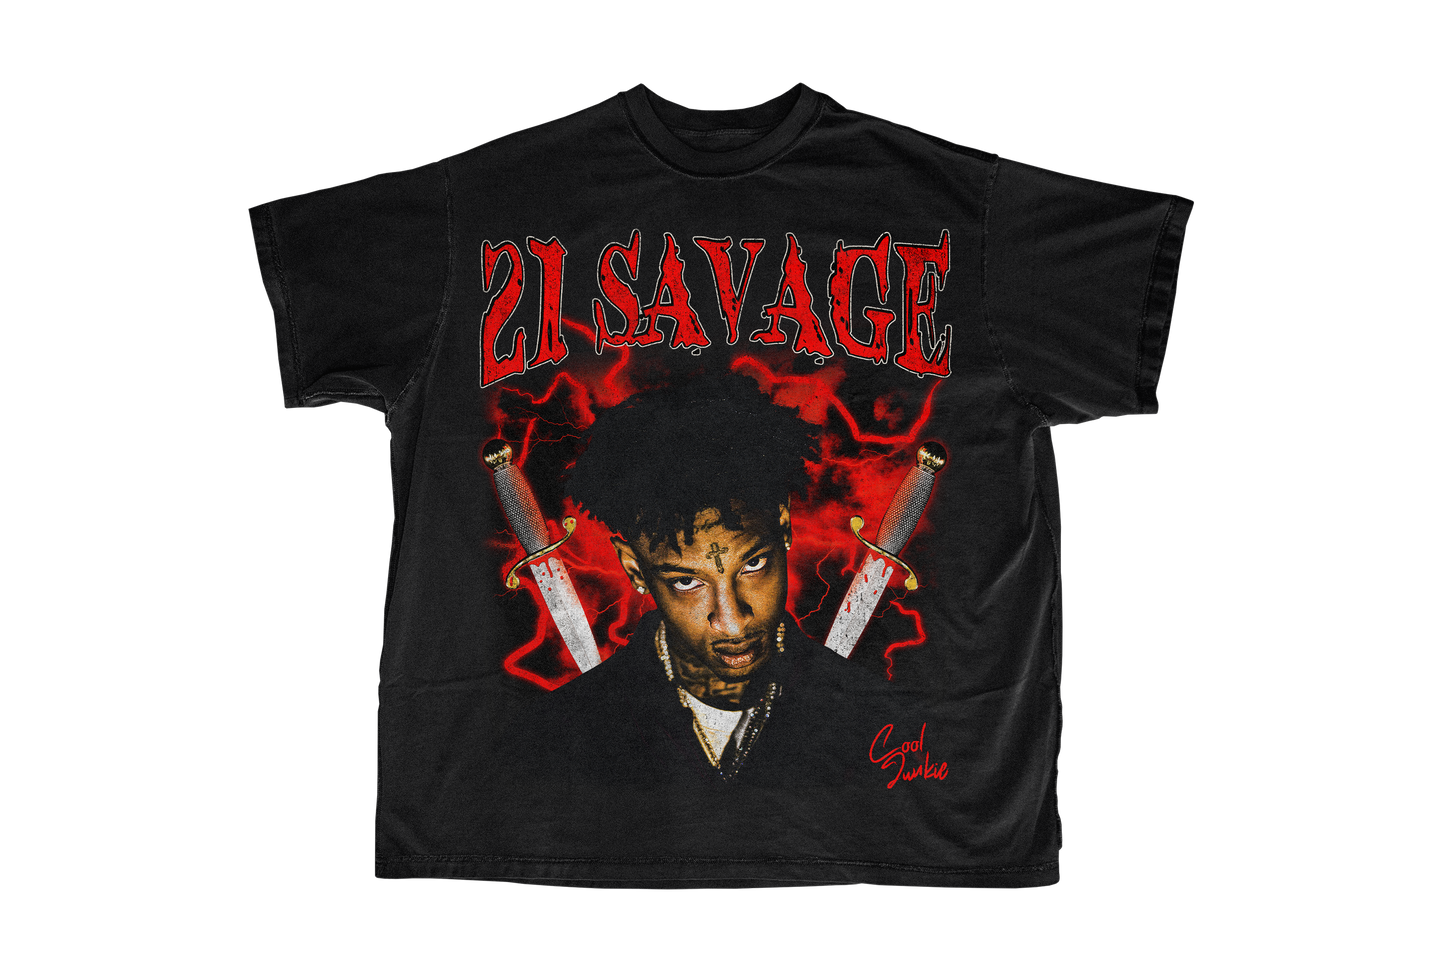 21 Savage Black Tee with red as the main color in the design